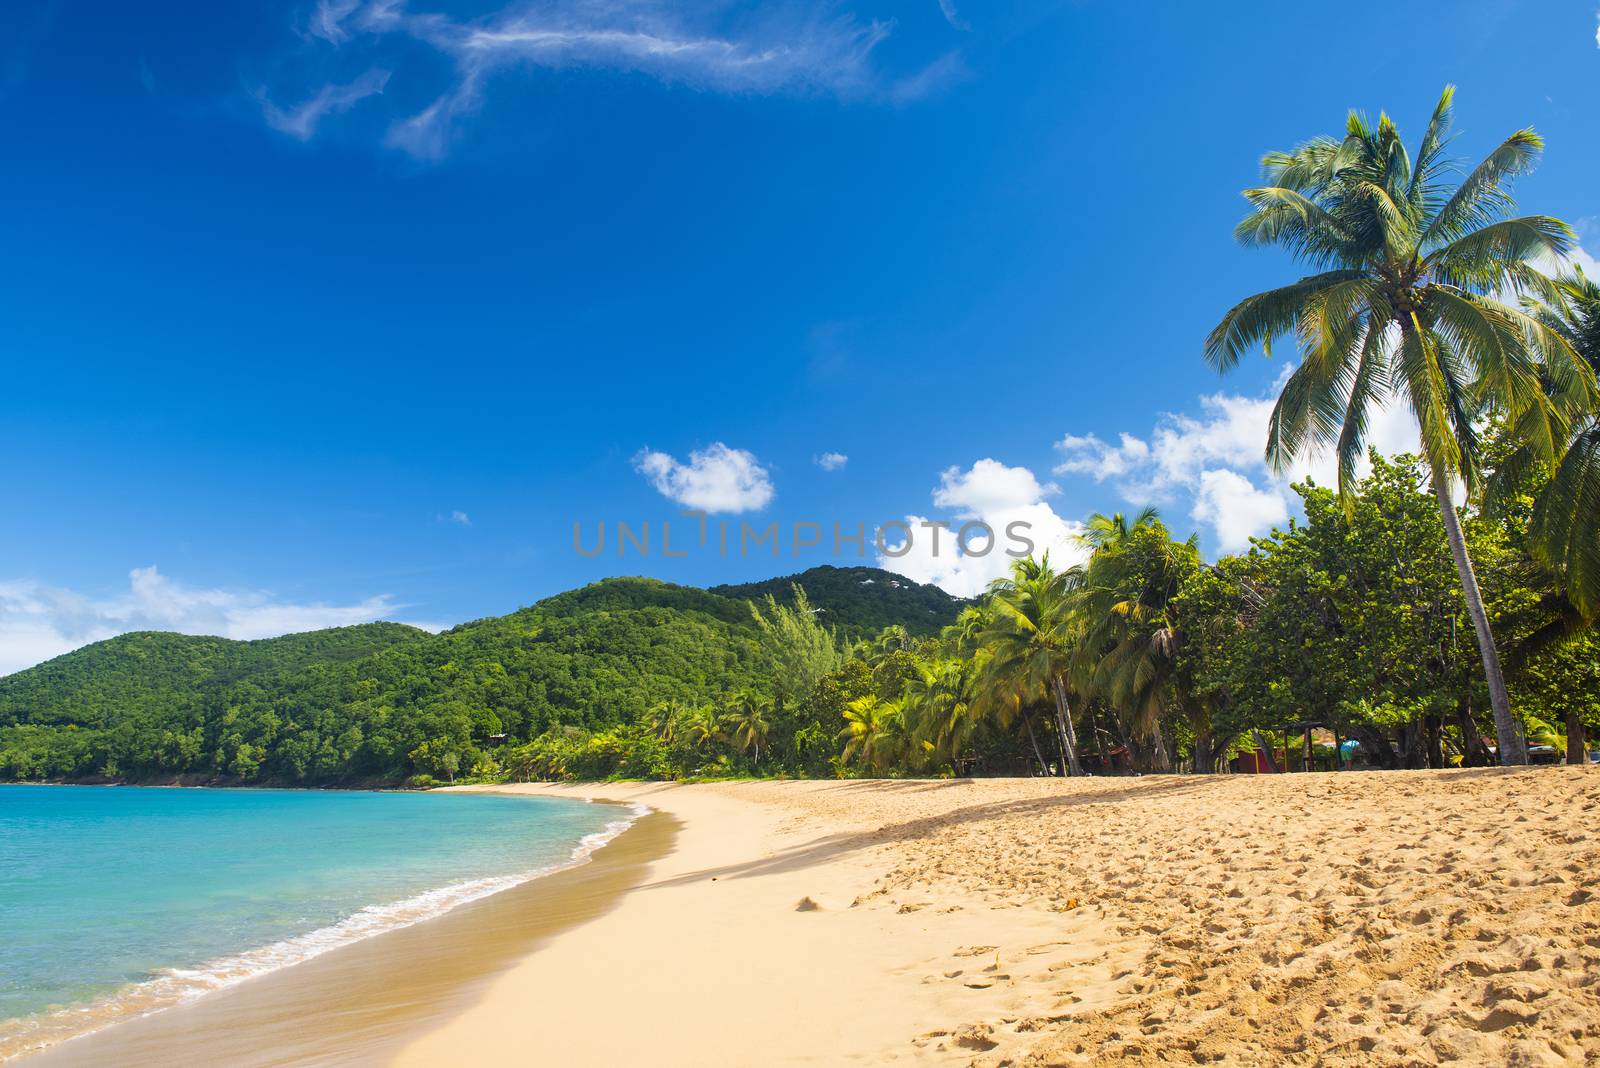 Great beach of Grand Anse near village of Deshaies, Guadeloupe, Caribbean